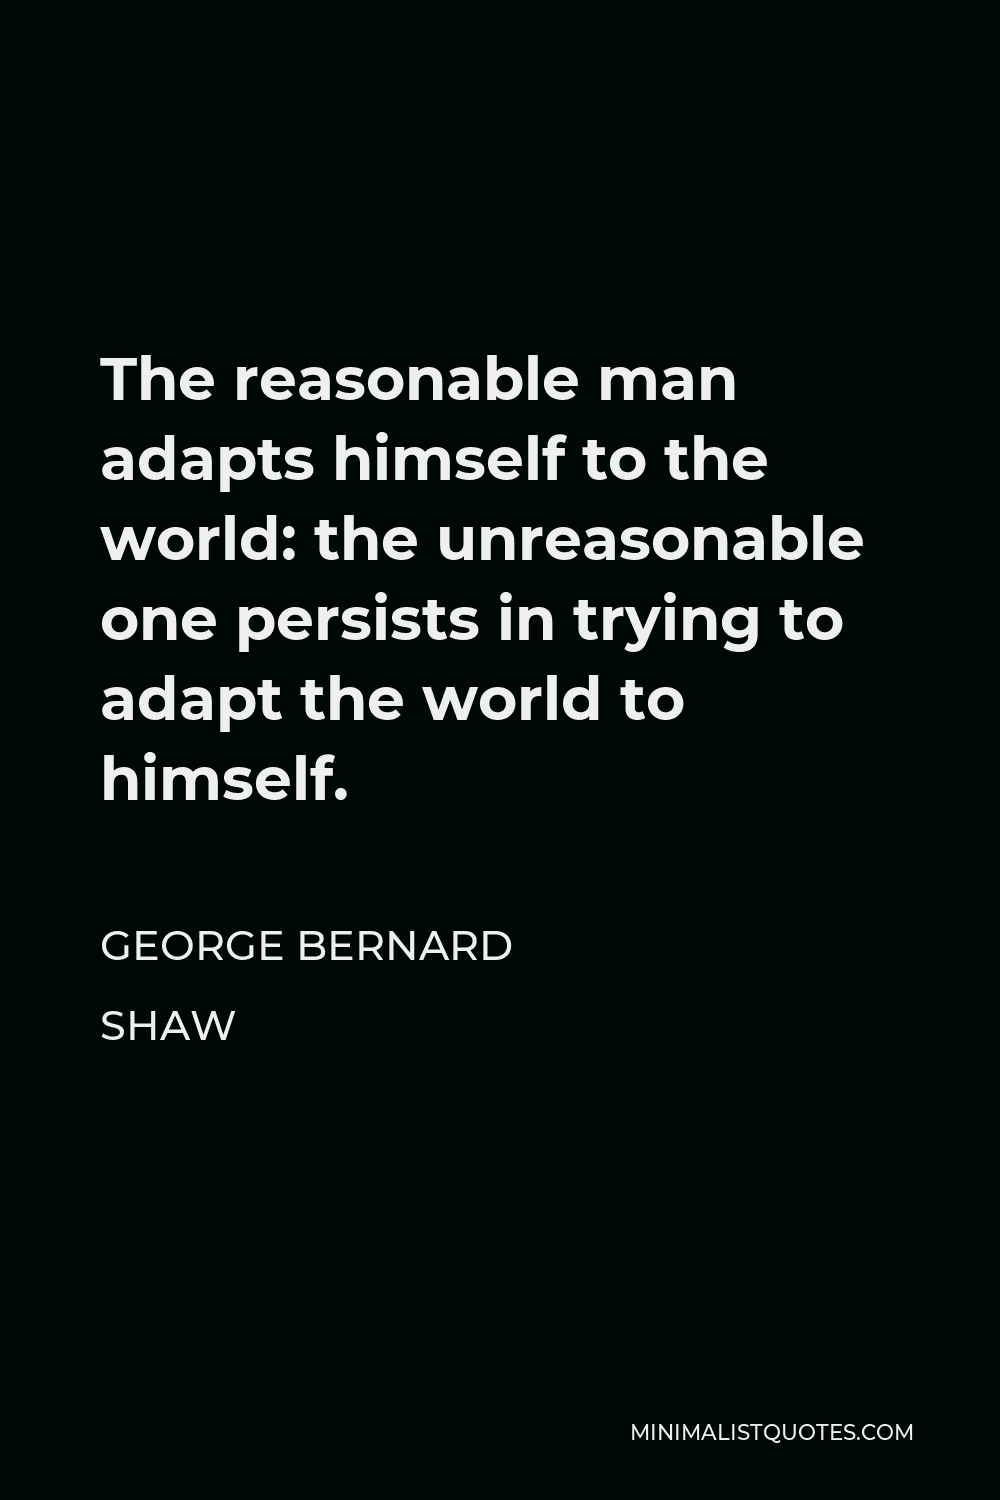 George Bernard Shaw Quote: The Reasonable Man Adapts Himself To The World: The Unreasonable One Persists In Trying To Adapt The World To Himself.